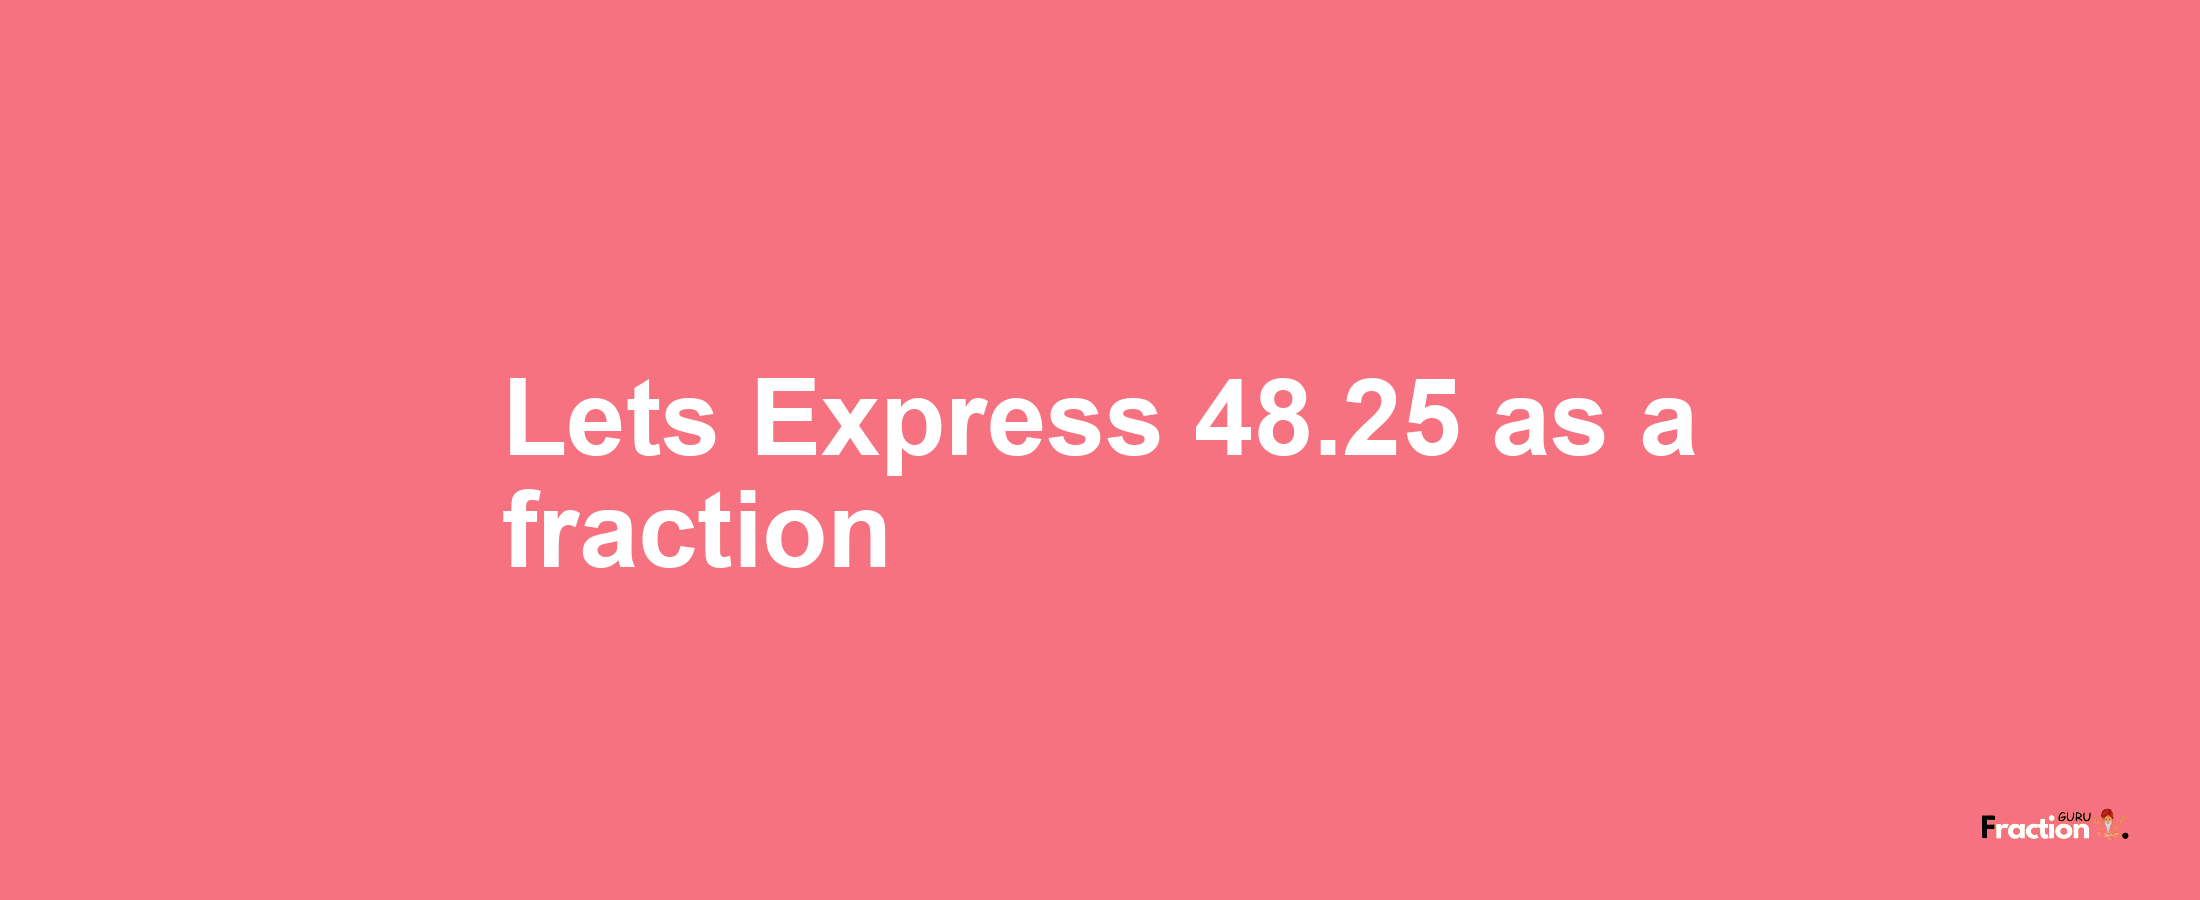 Lets Express 48.25 as afraction